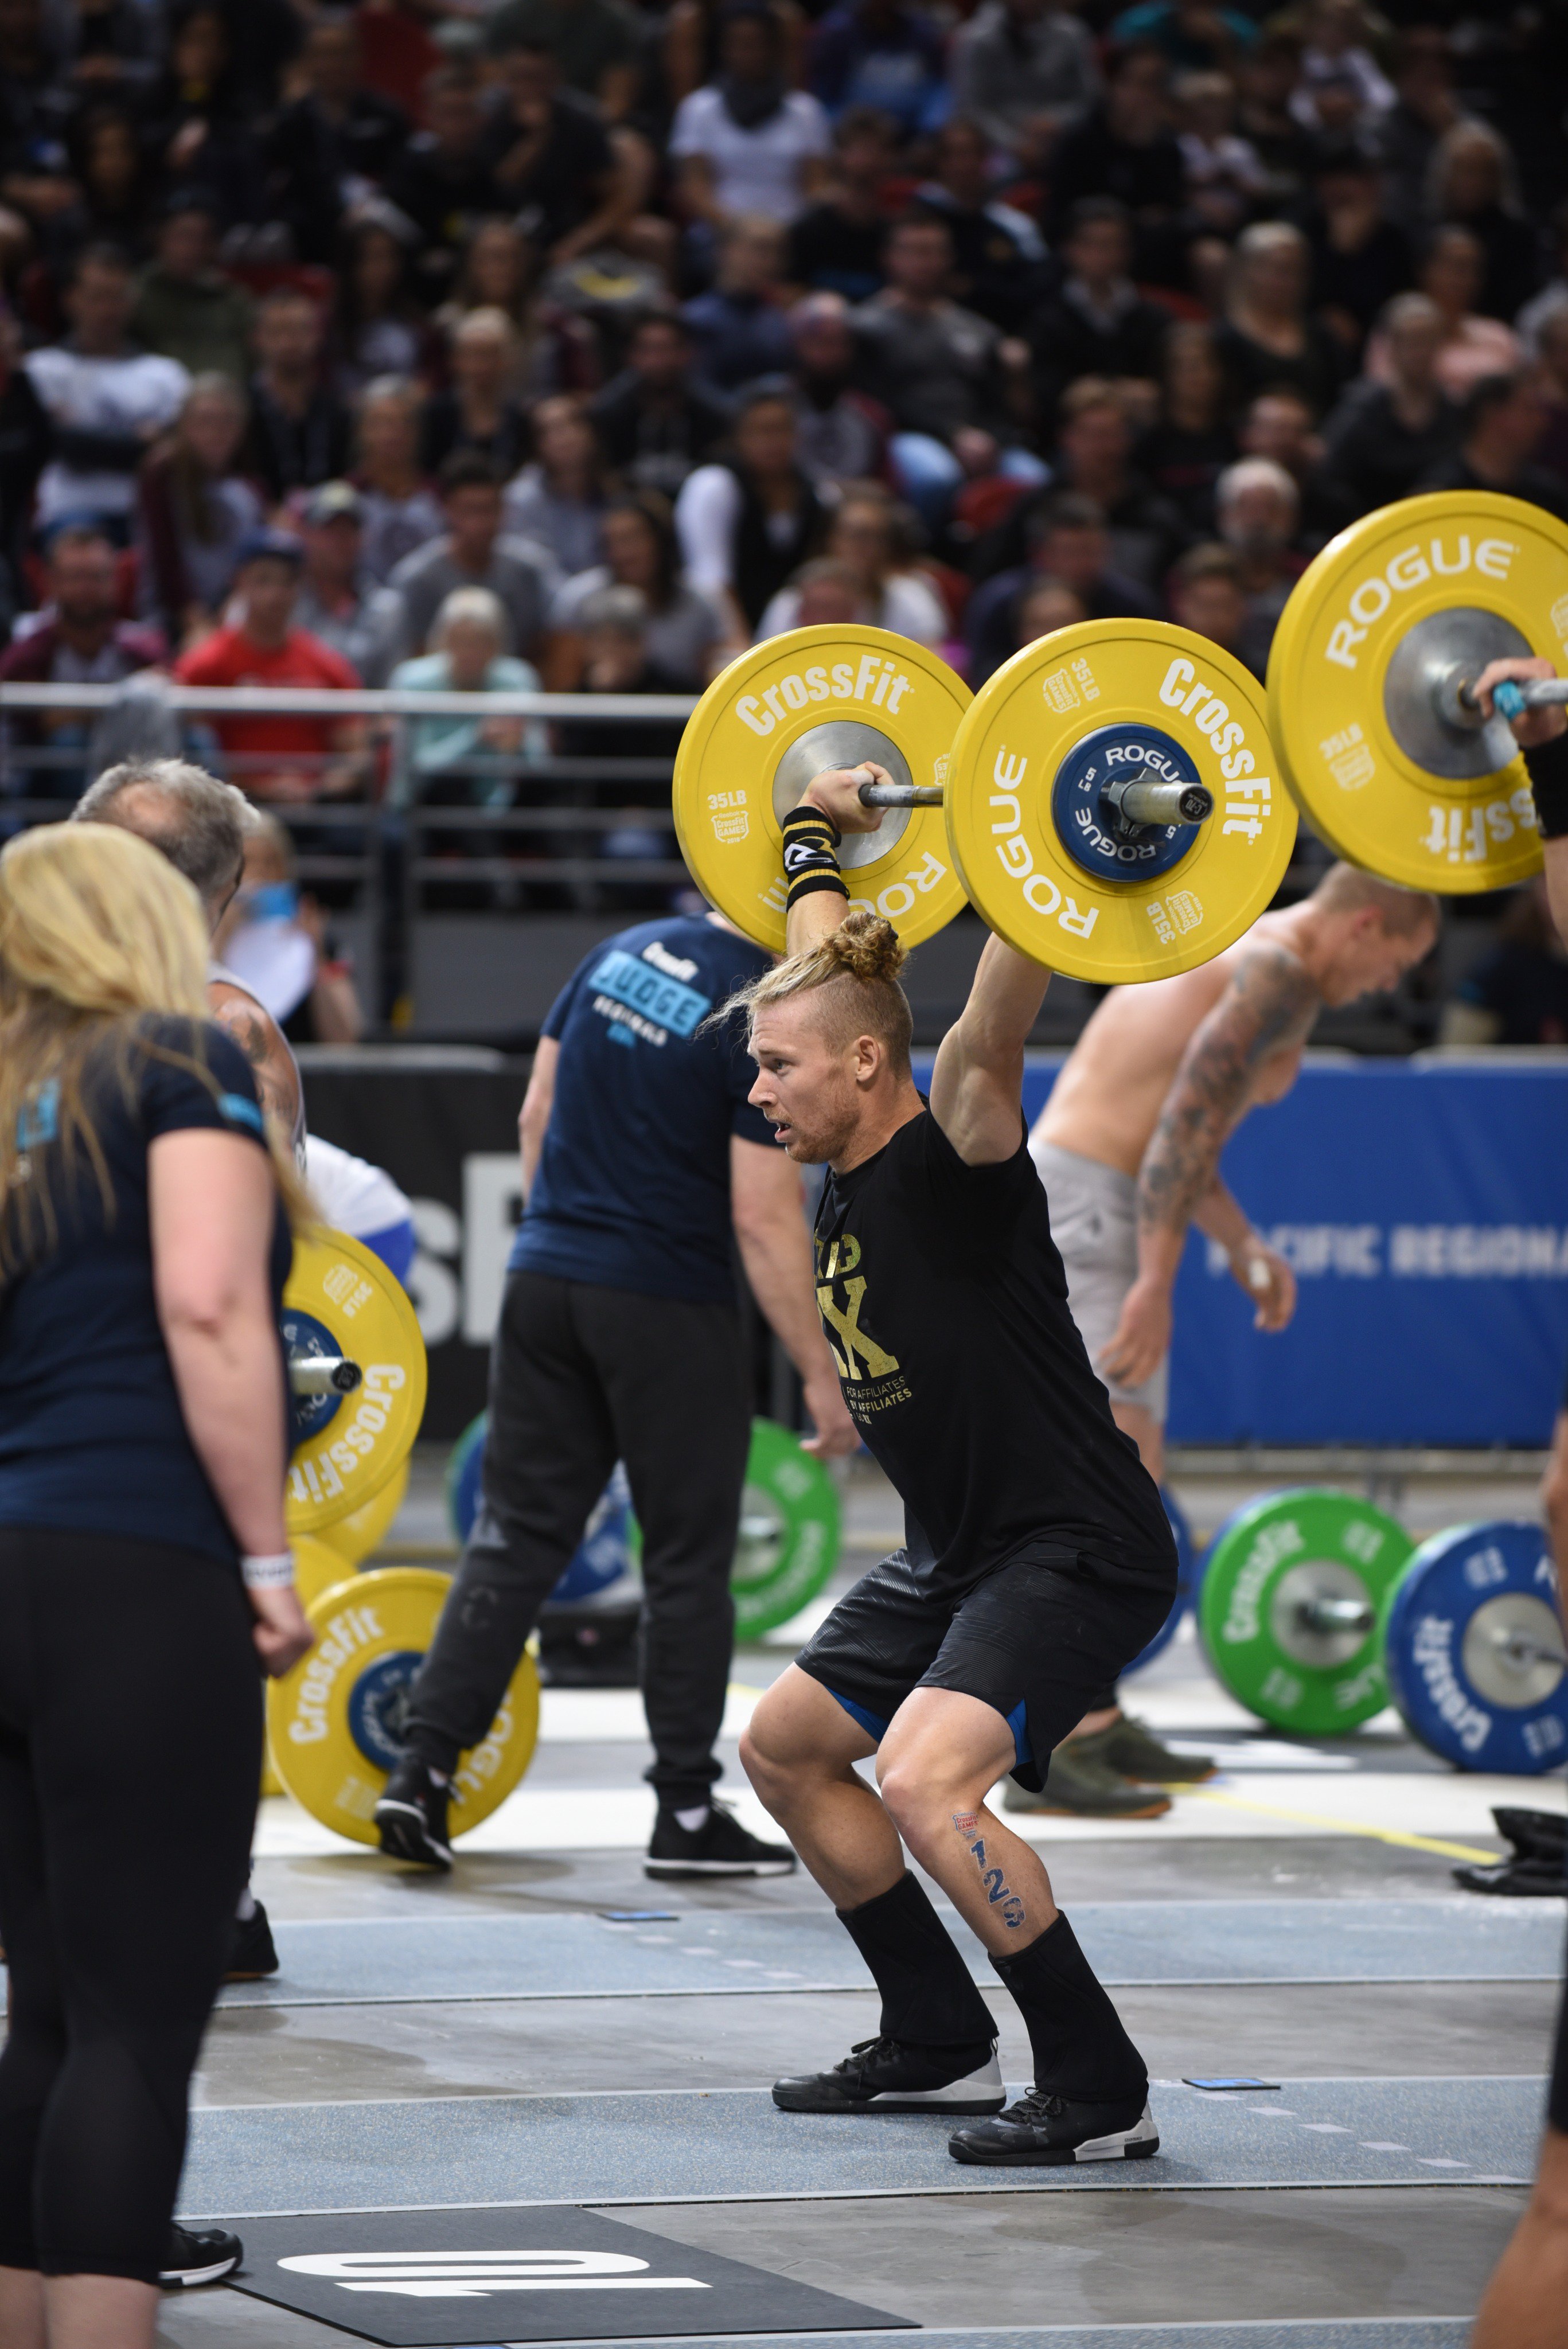 The CrossFit Games on X: Men's Overall Leaderboard #CrossFitGames   / X